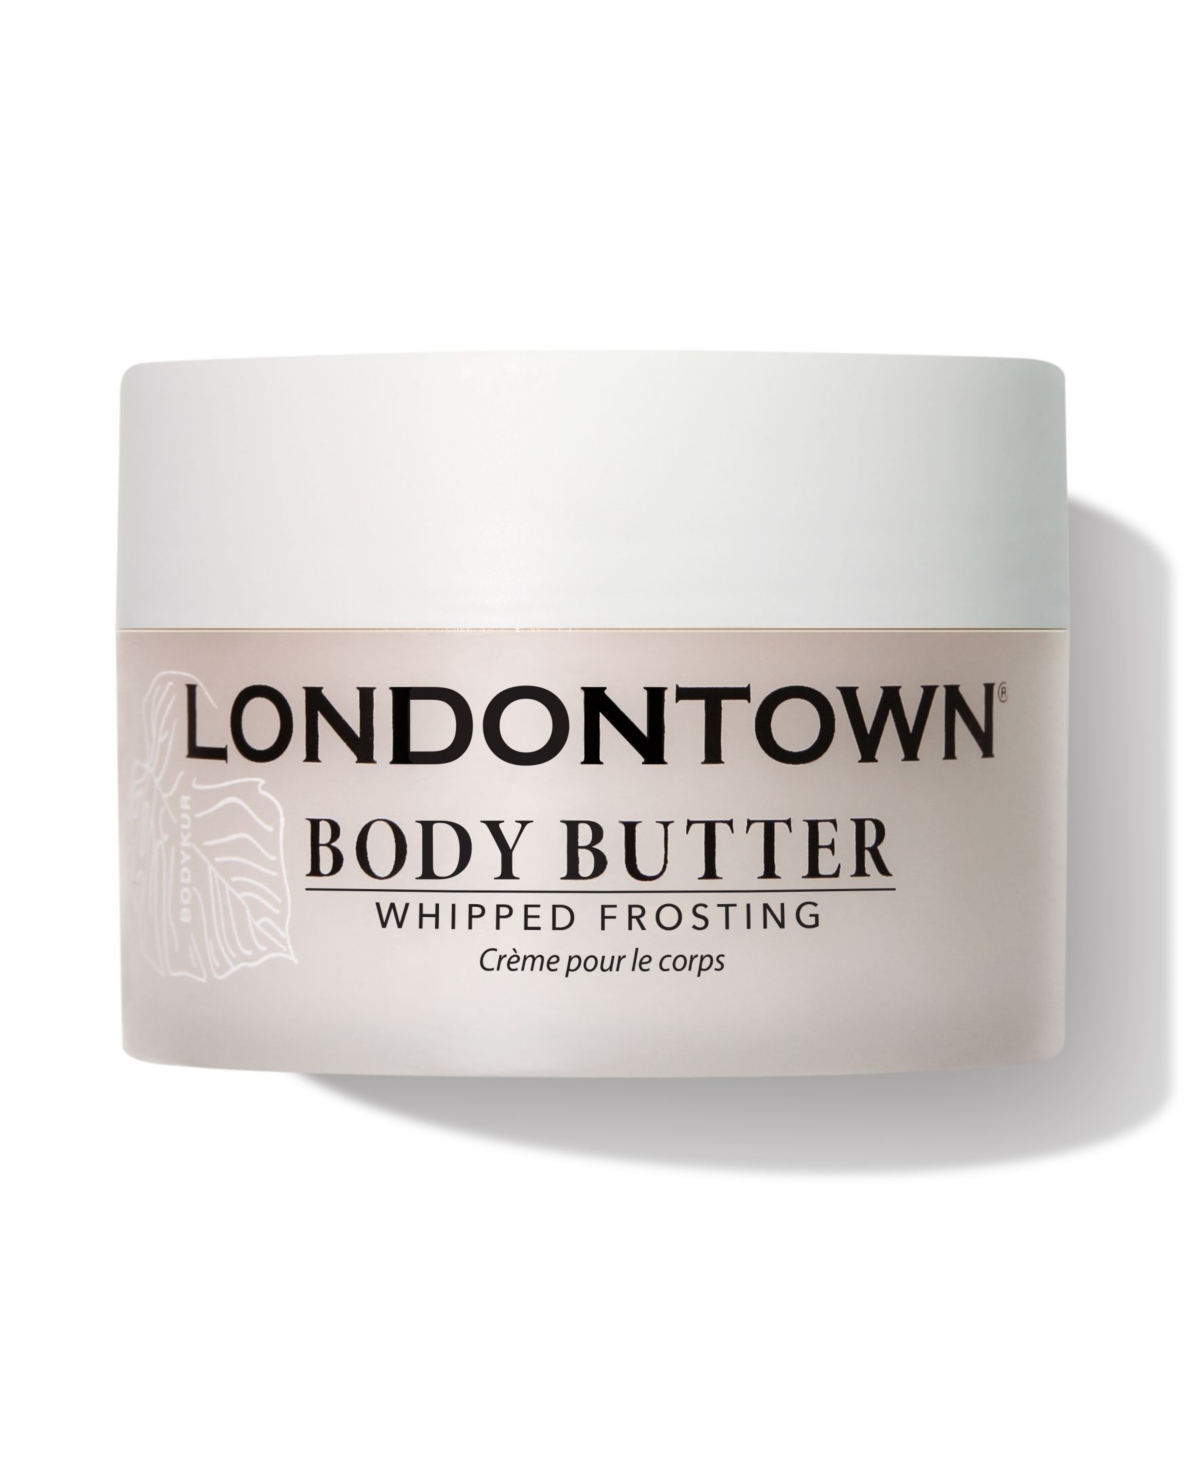 Londontown Whipped Frosting Body Butter, 7.6 oz